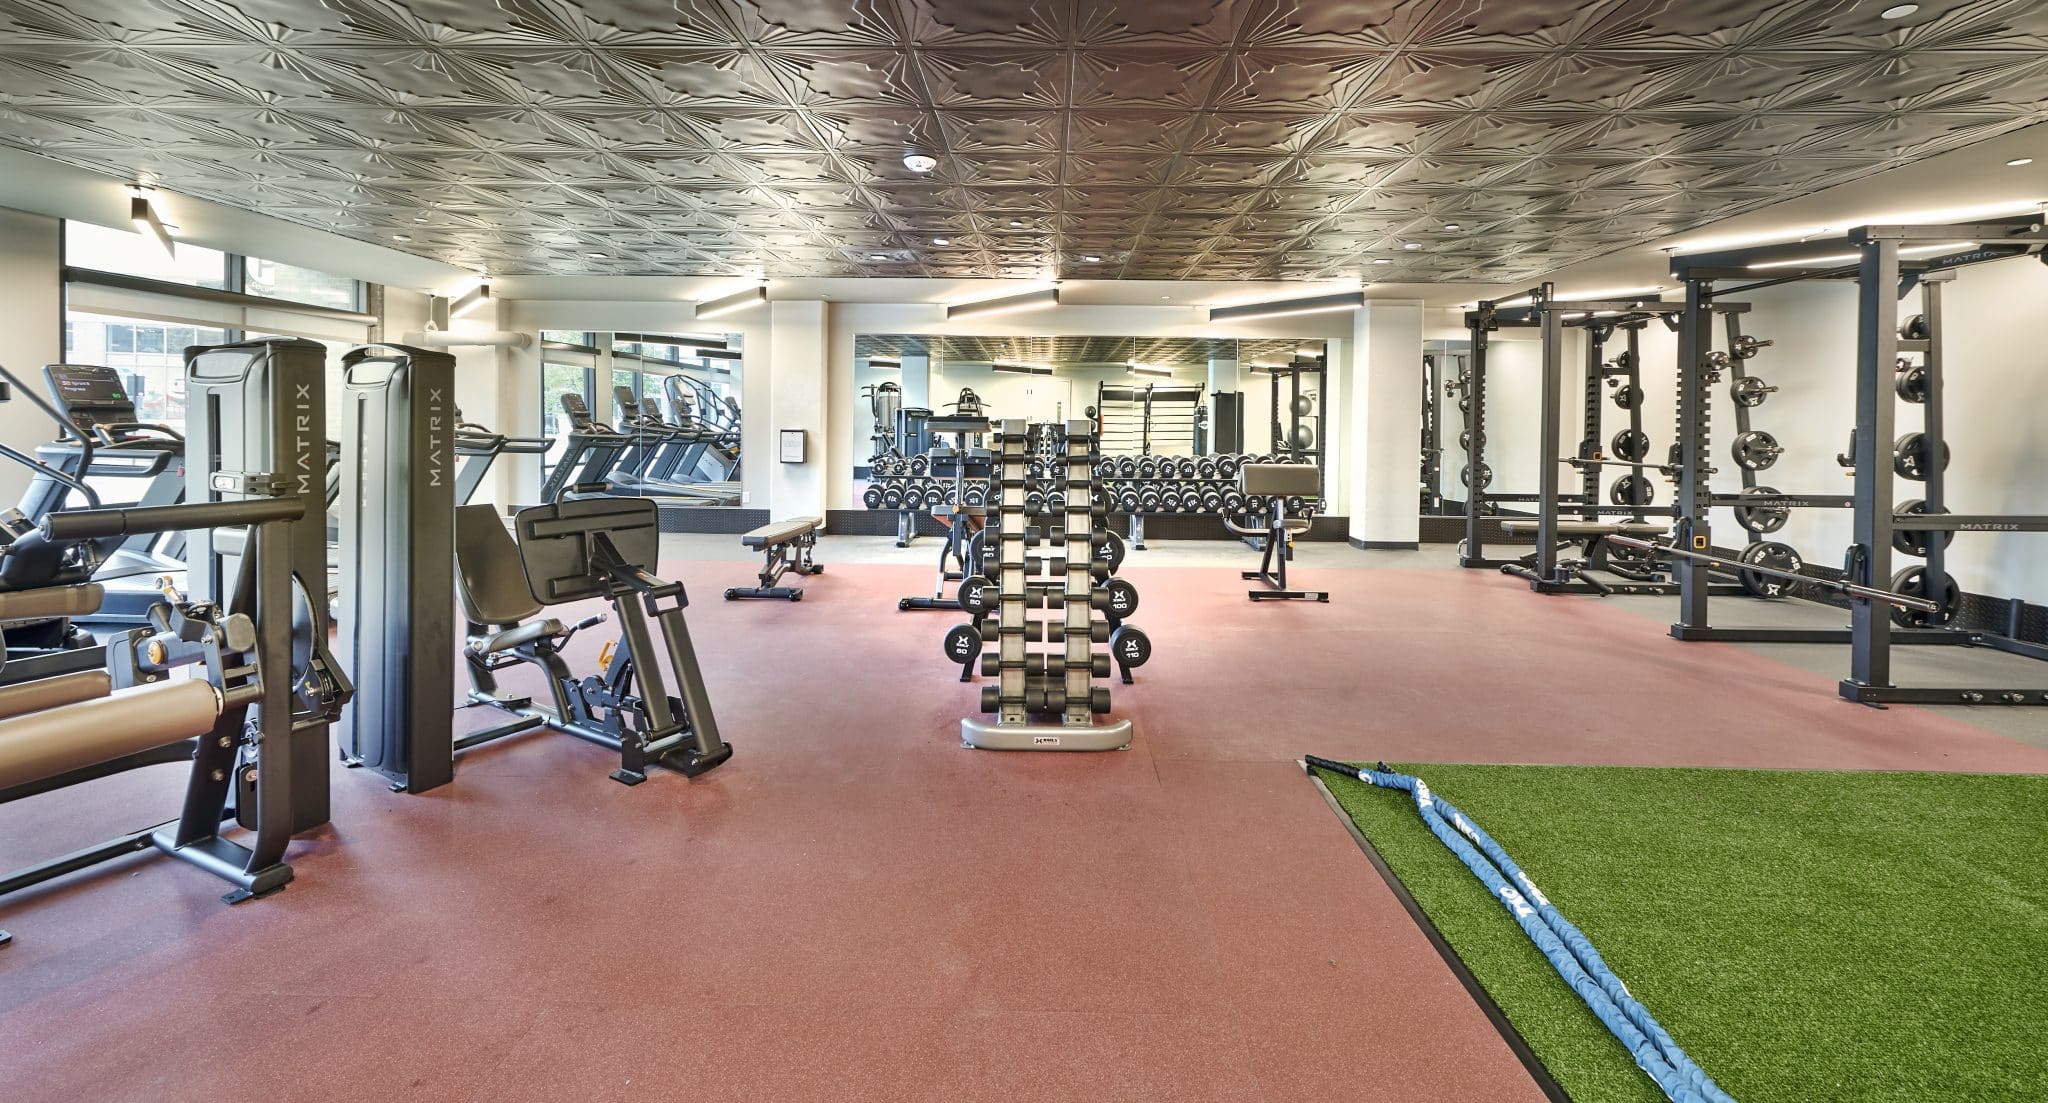 The Verve Columbus luxury student apartments fitness center with weight machines and turf area